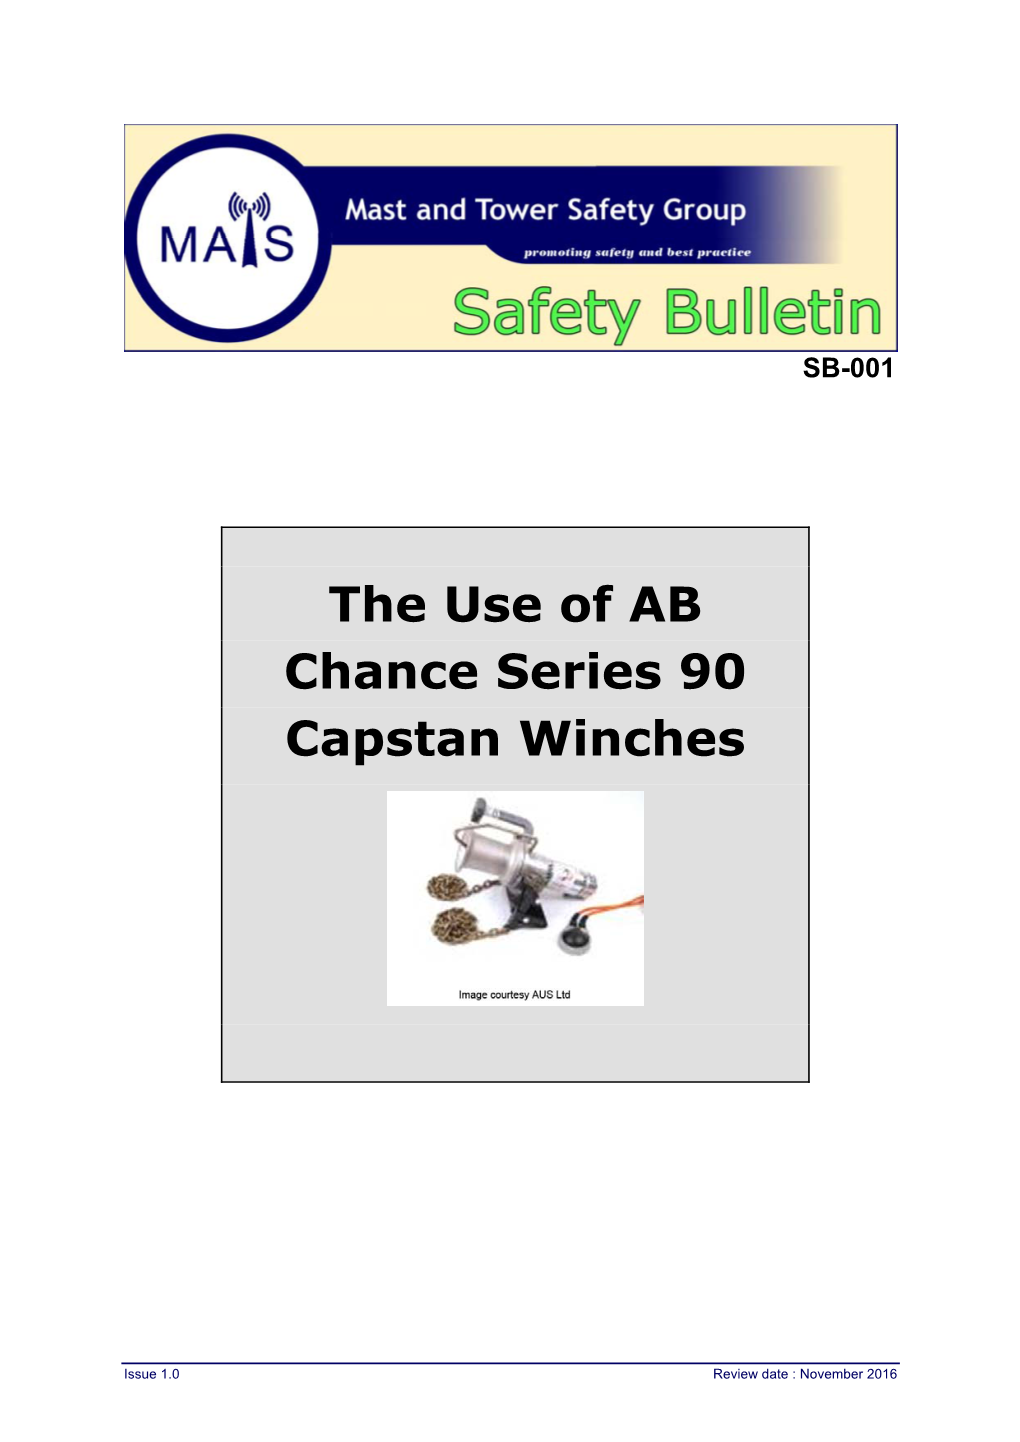 The Use of AB Chance Series 90 Capstan Winches